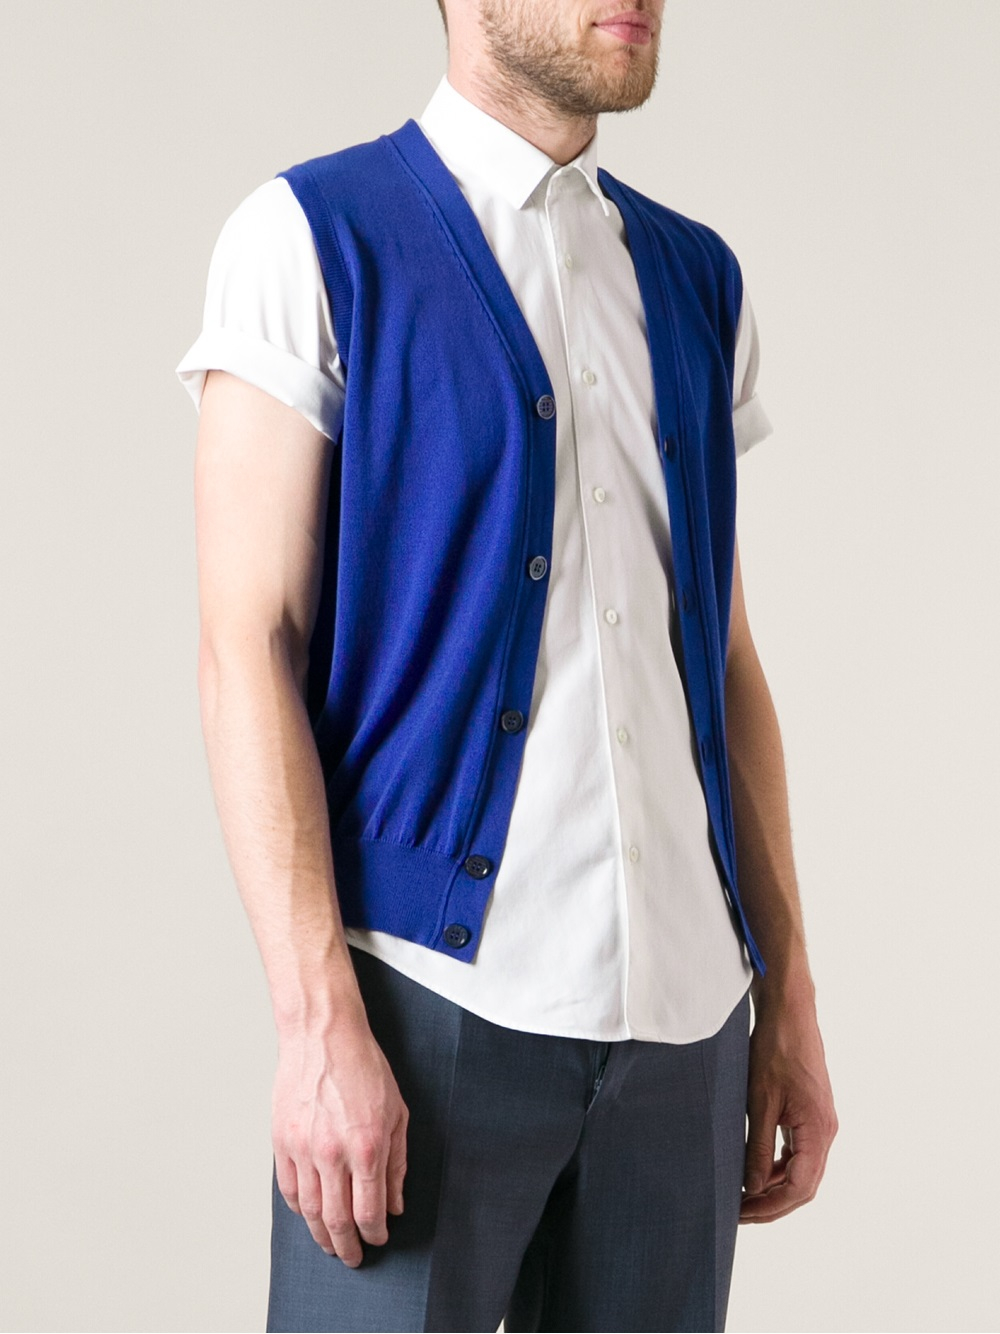 Lyst - Canali Sleeveless Cardigan in Blue for Men